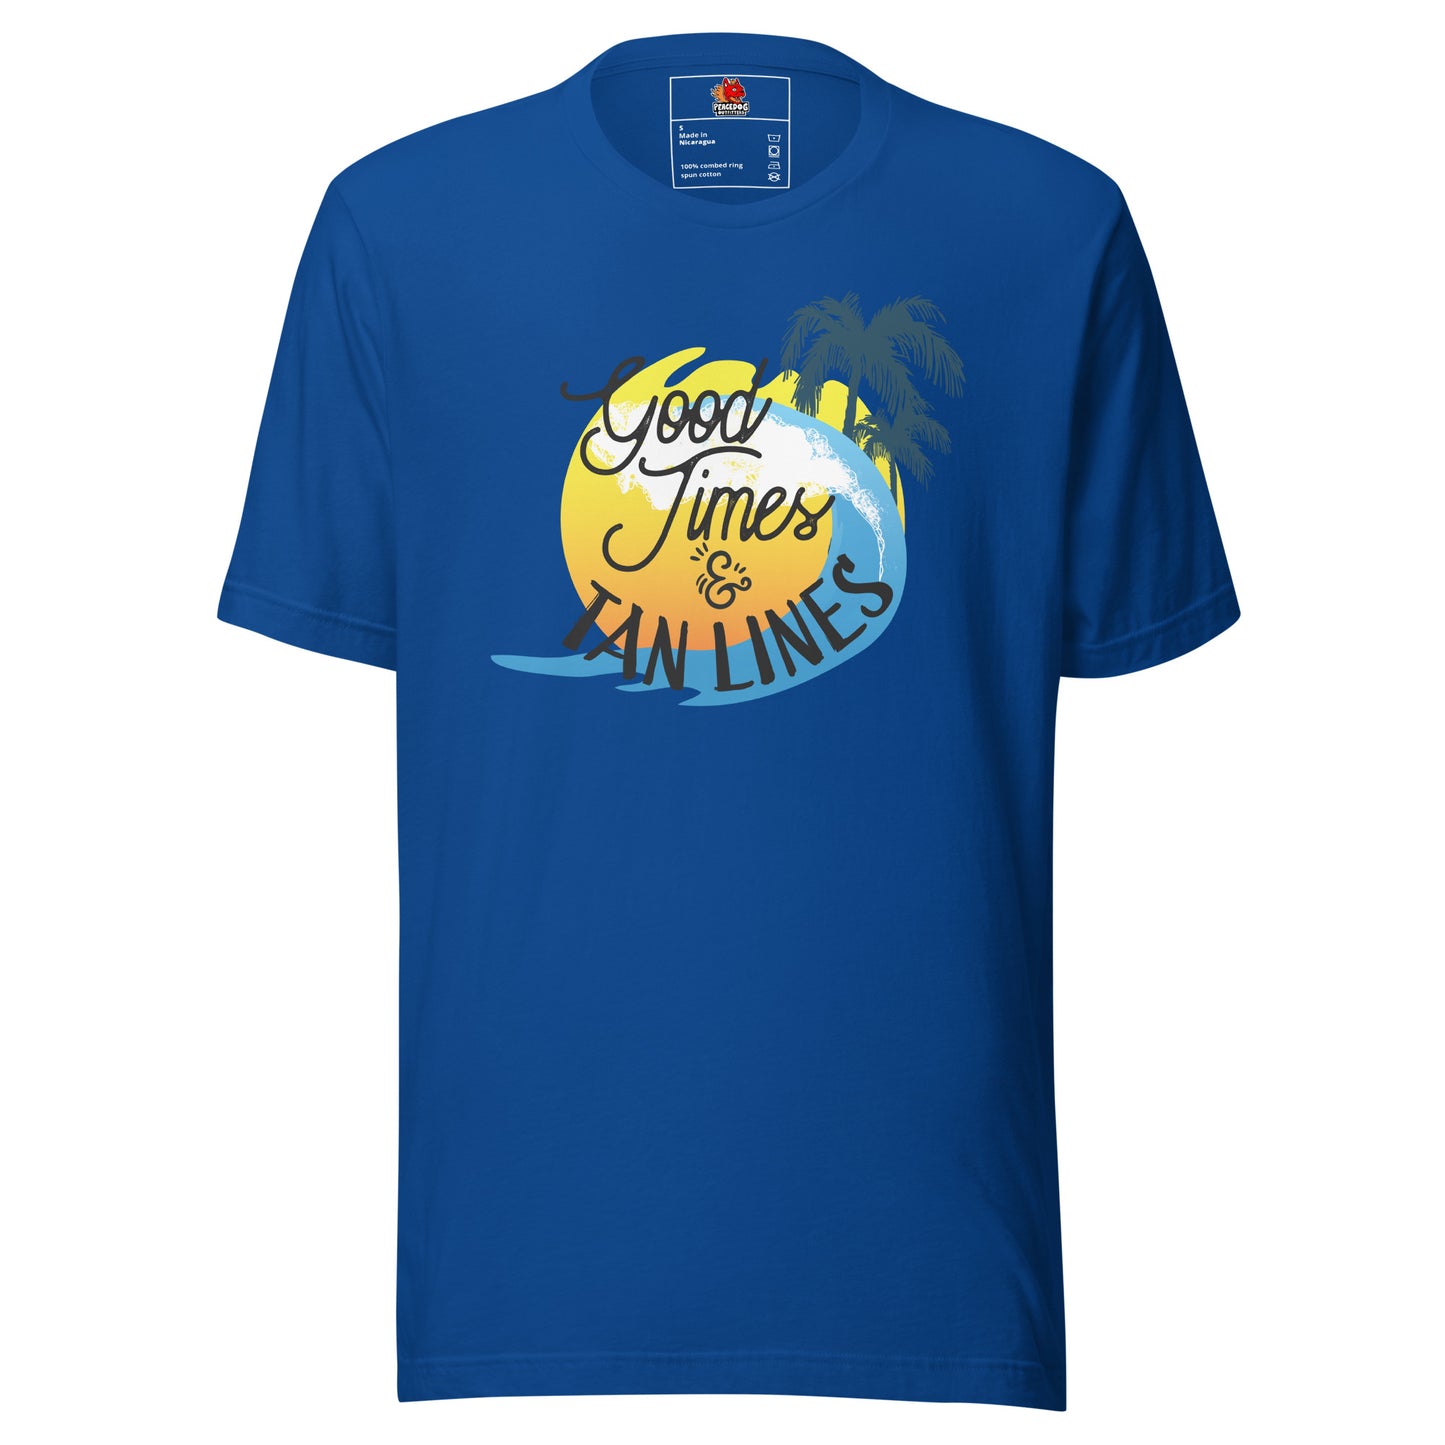 Good Times and Tan Lines T-Shirt